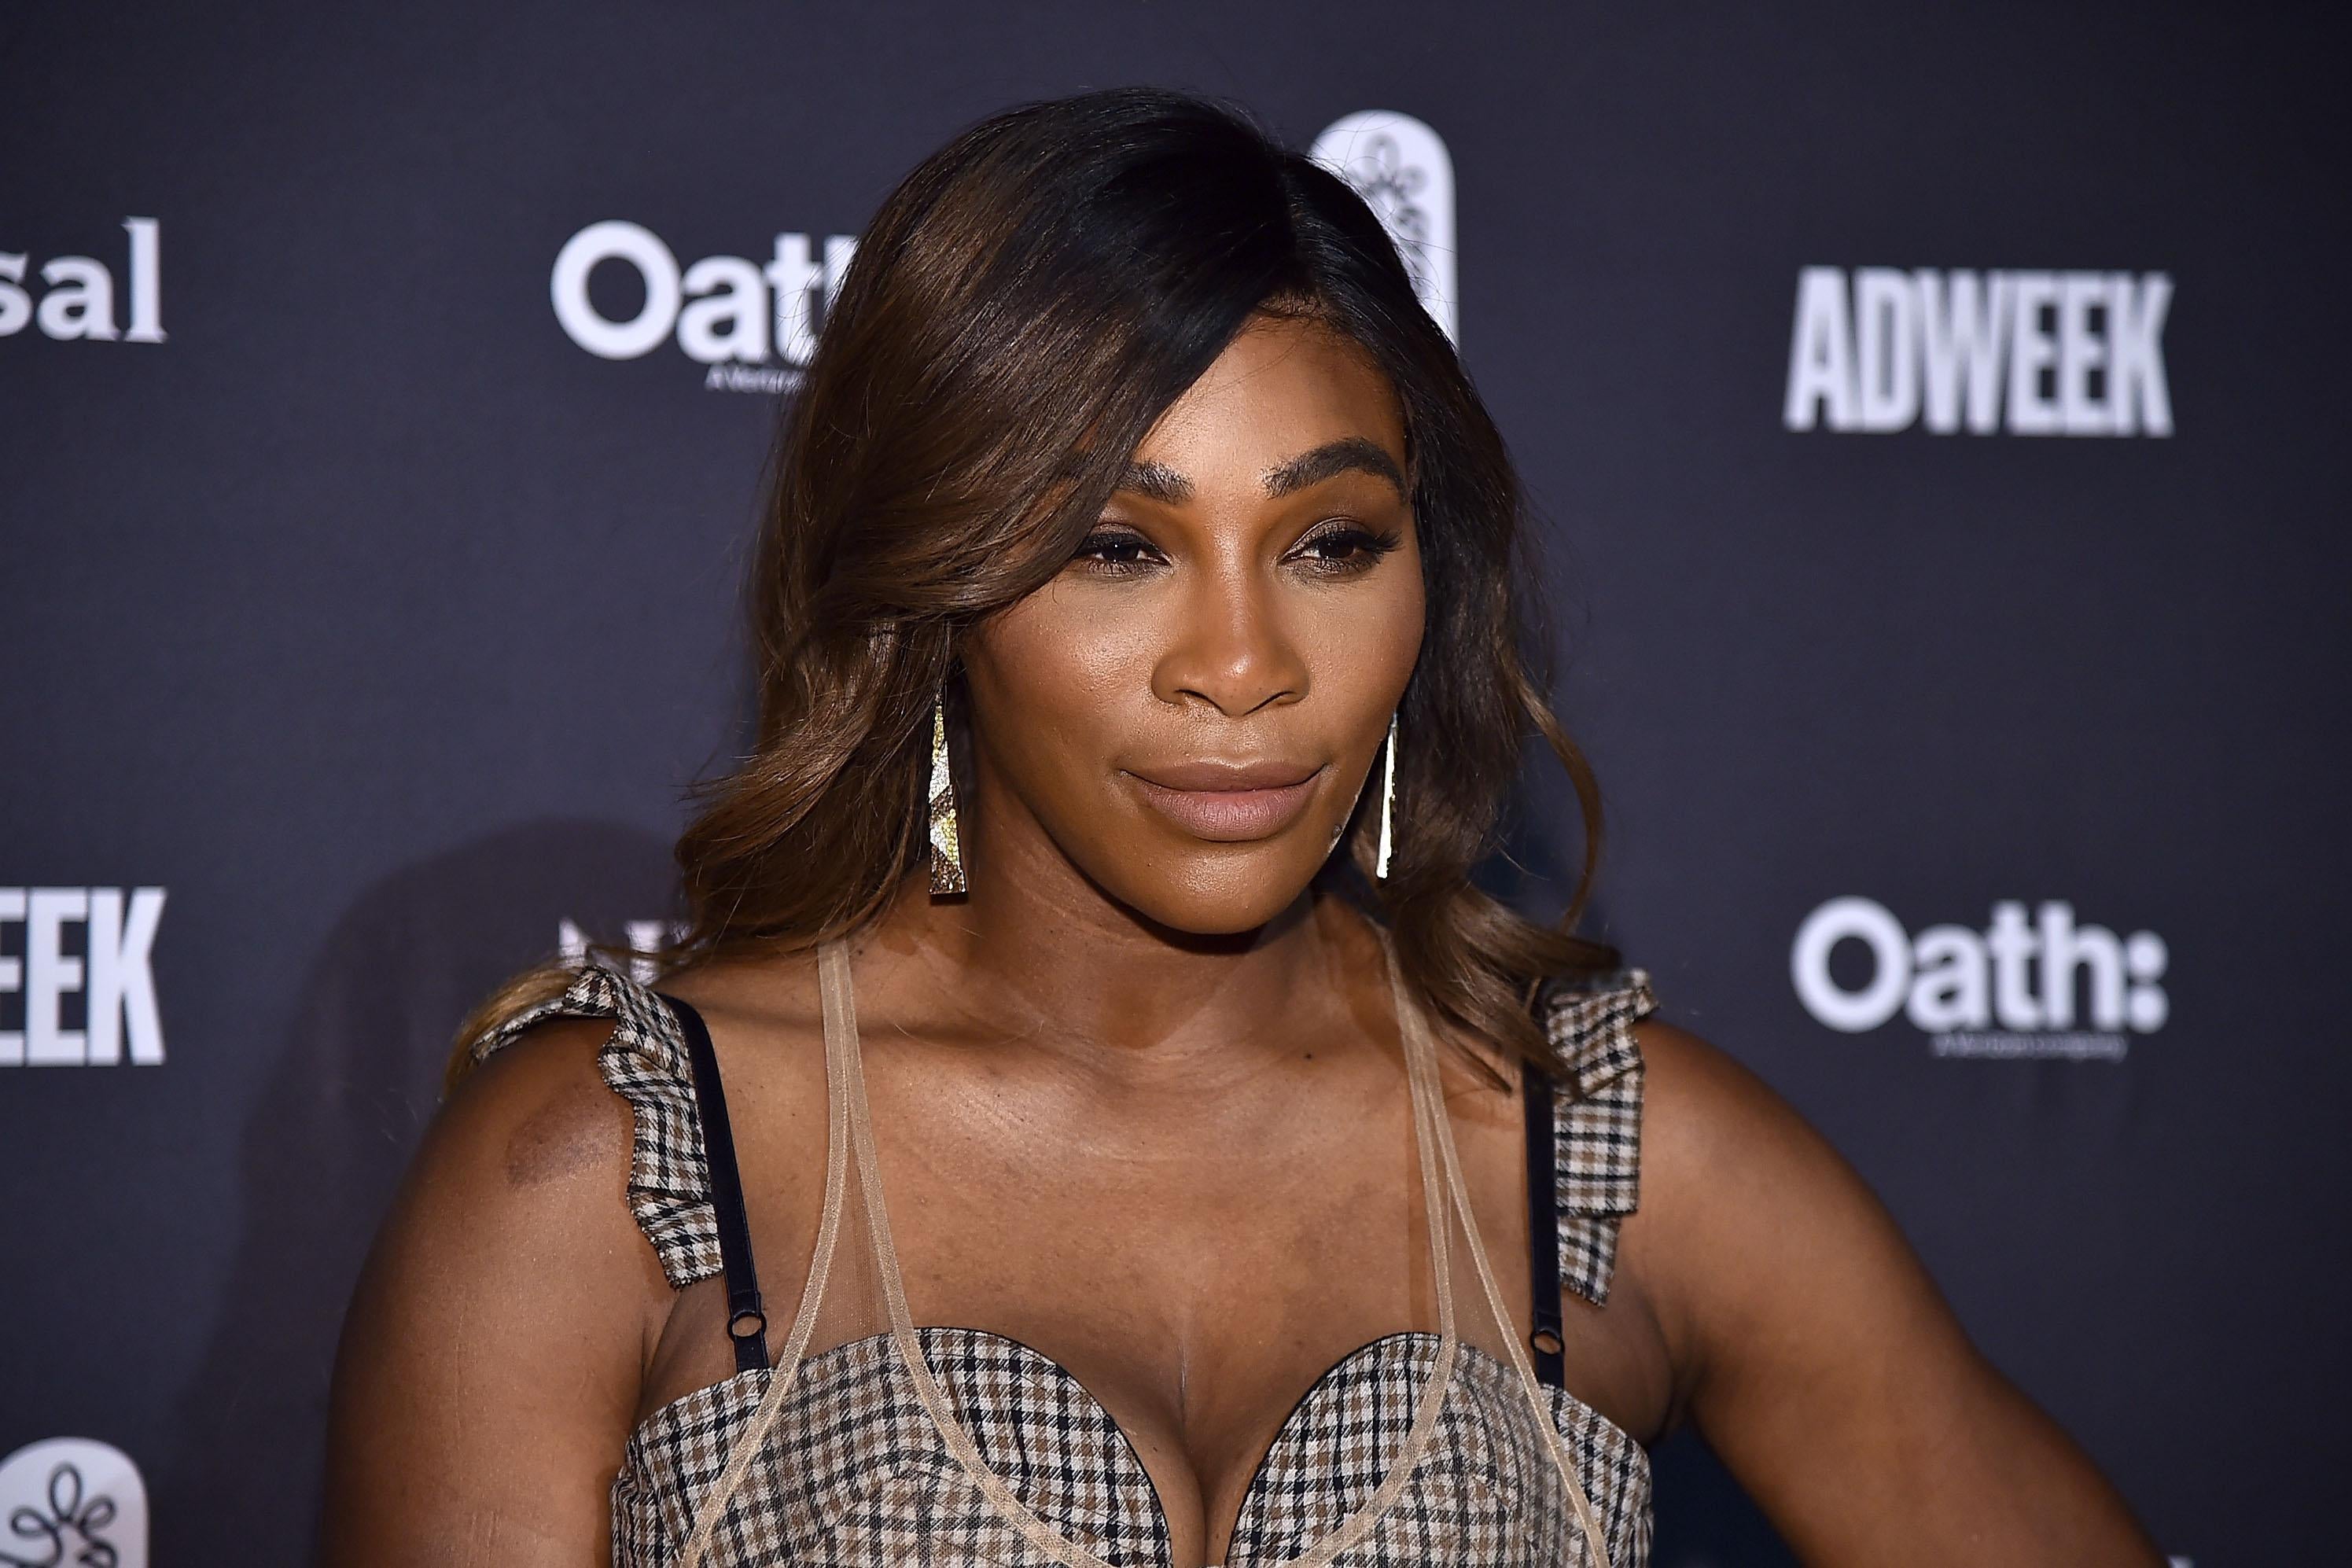 Serena Williams stands against a black backdrop, wearing a plaid sleeveless dress.